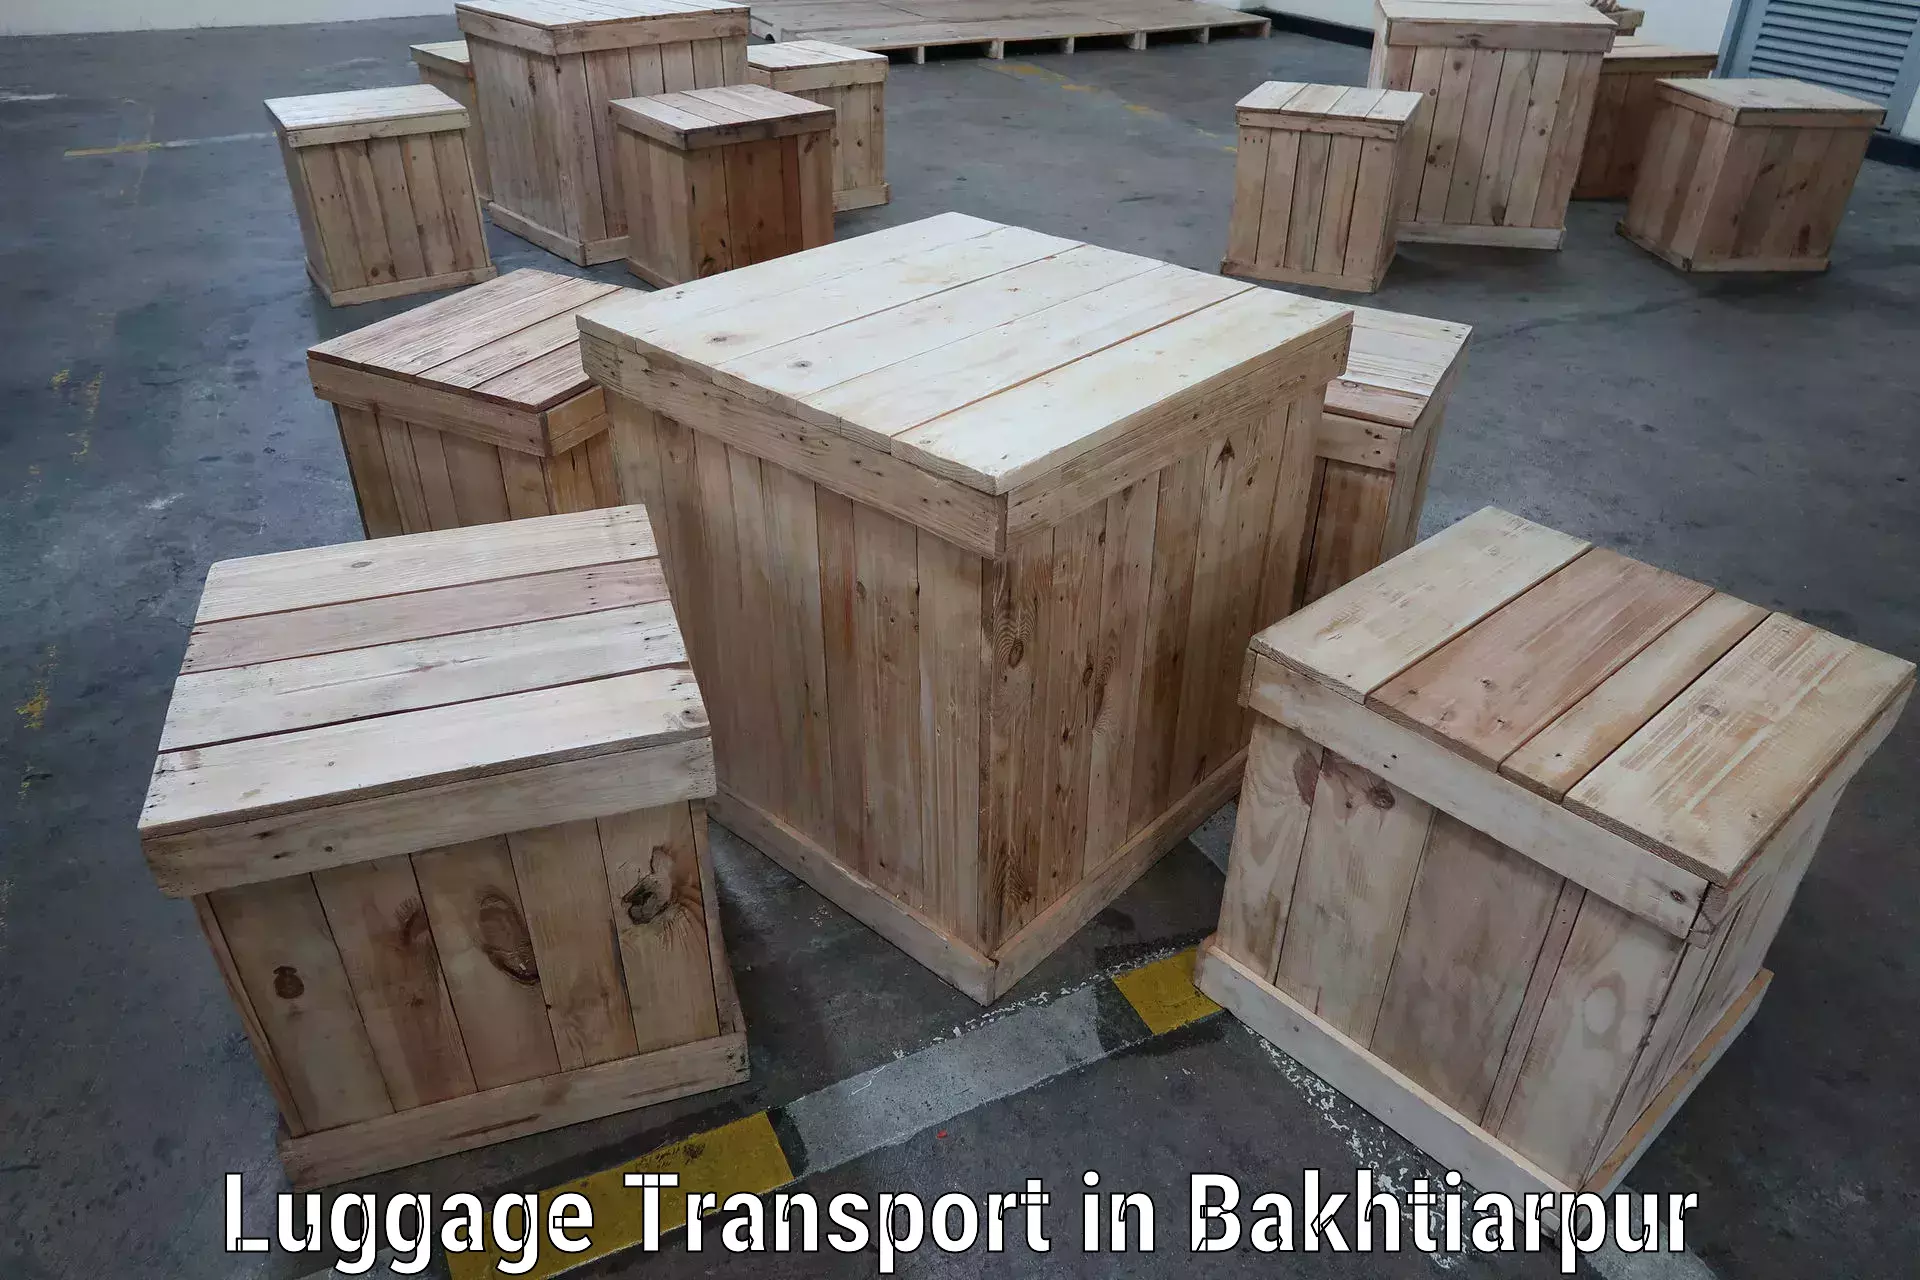 Luggage delivery system in Bakhtiarpur